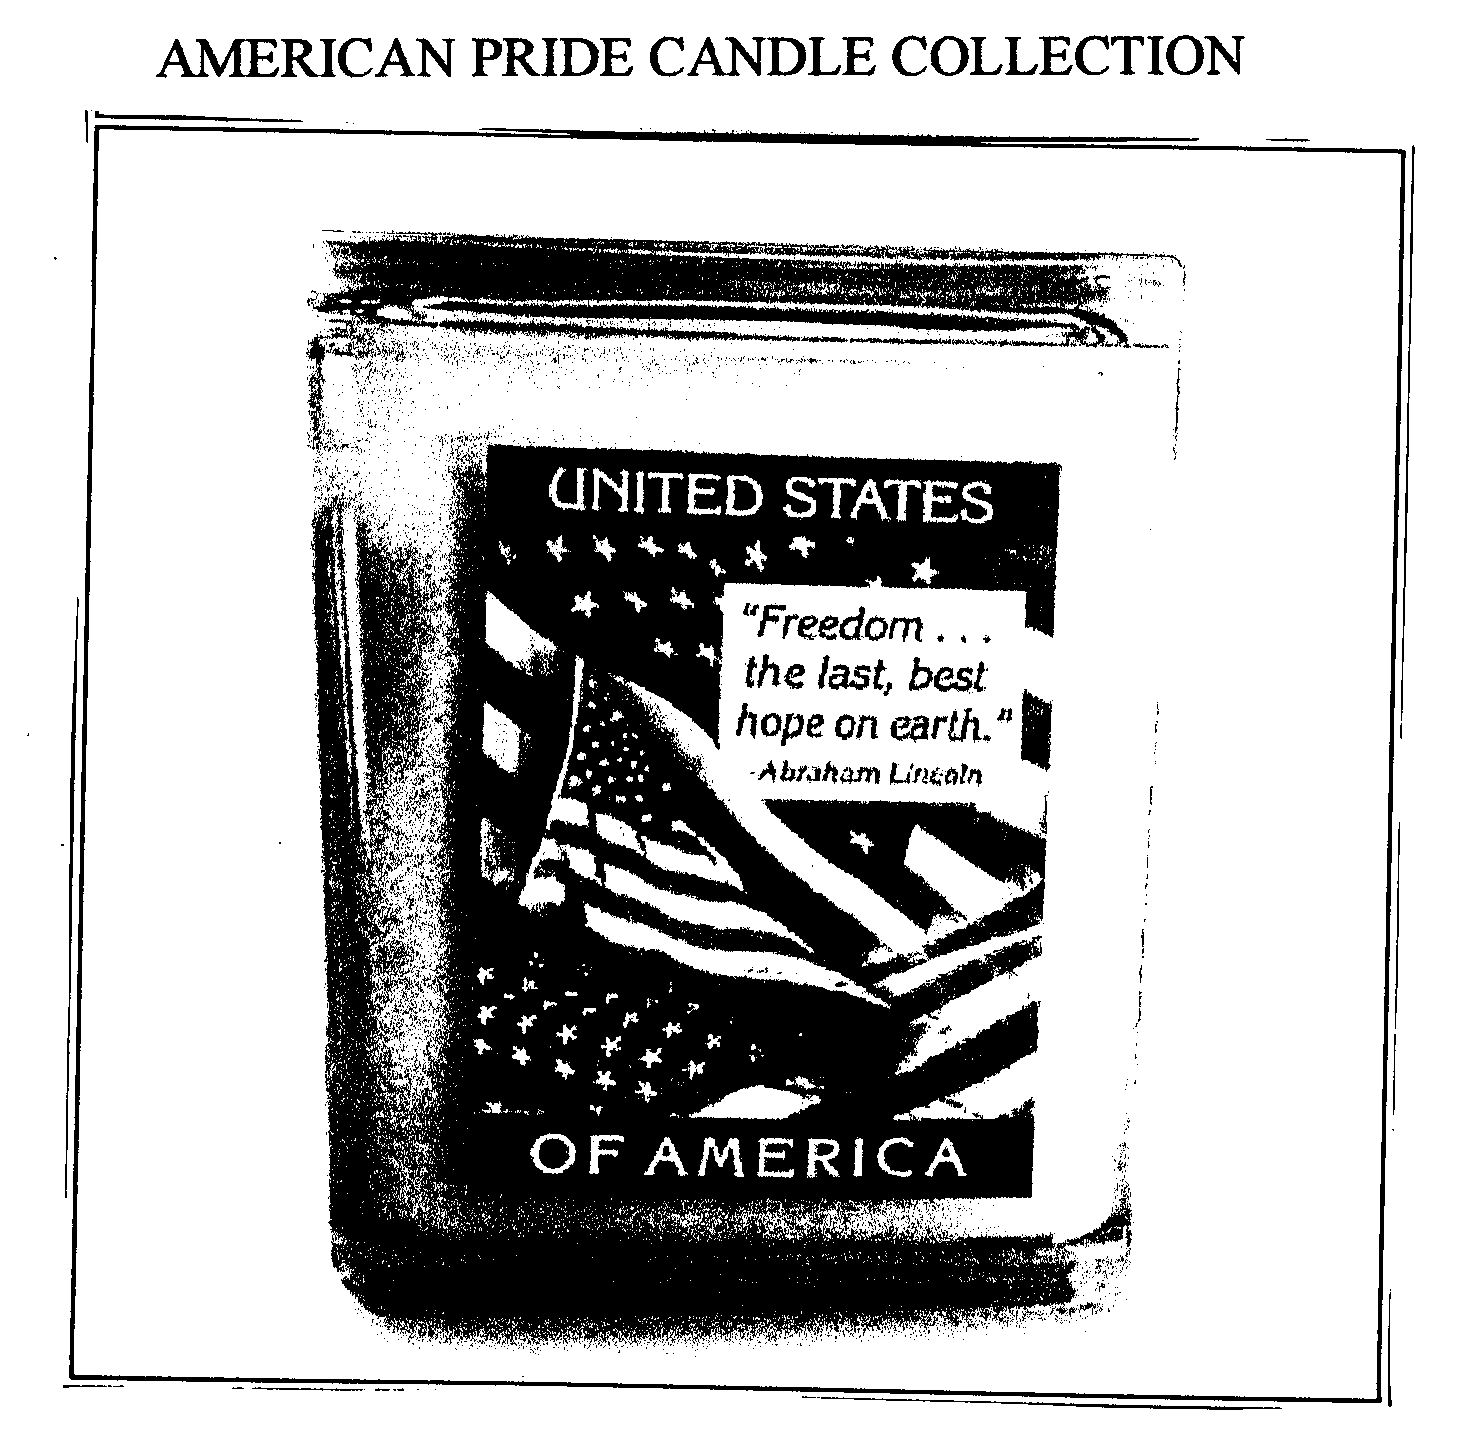  AMERICAN PRIDE CANDLE COLLECTION